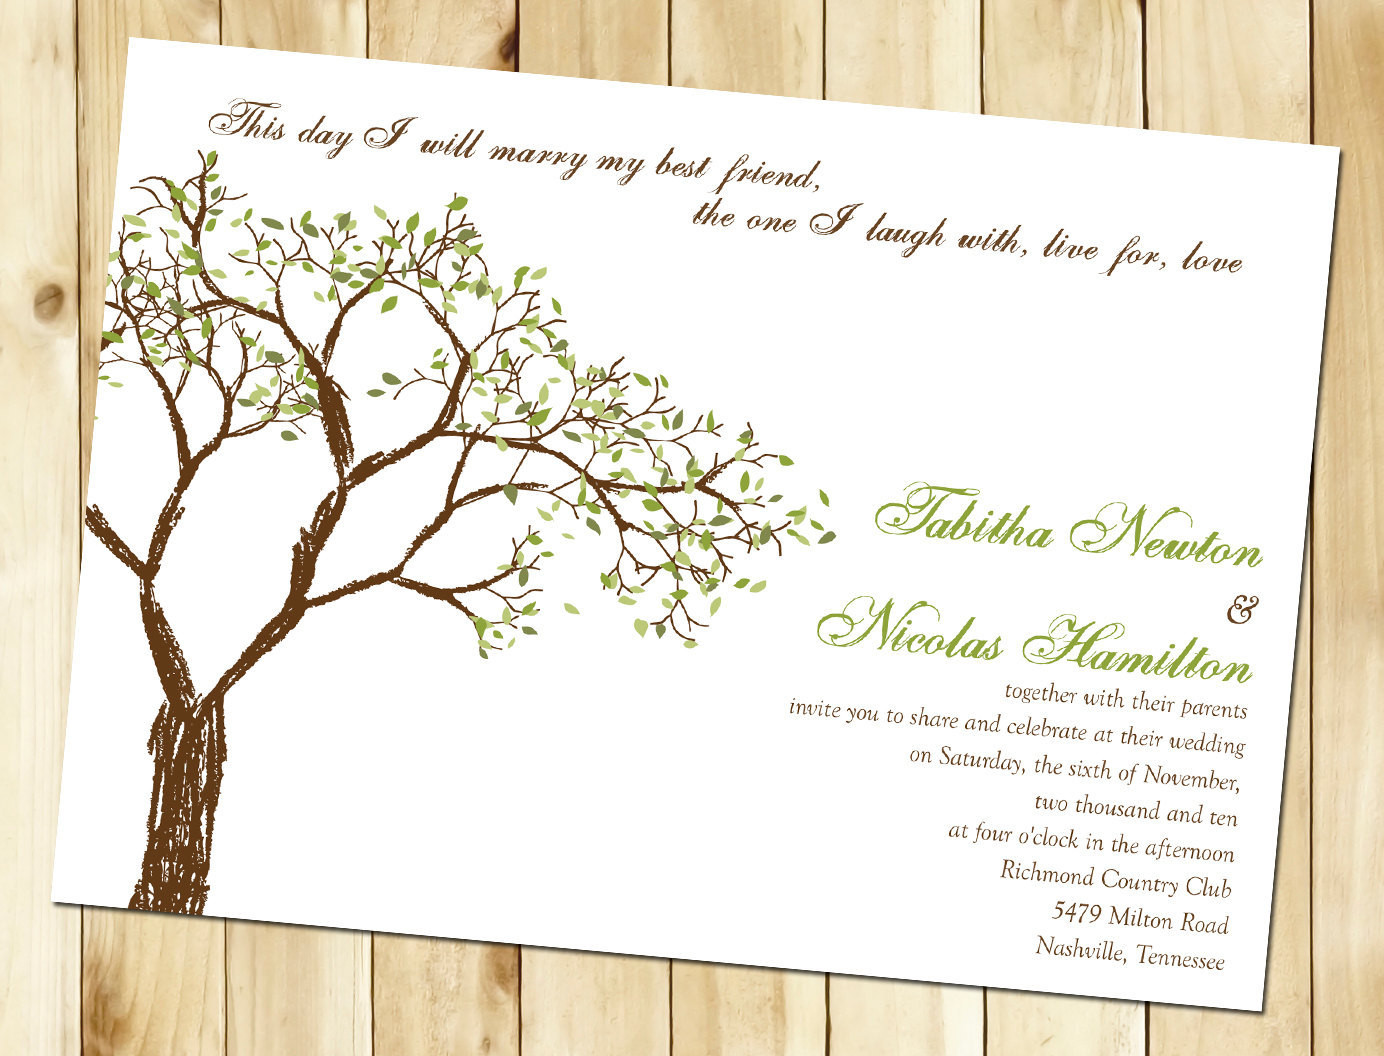 Wedding Invitations With Trees
 Summer Tree Wedding Invitation Sample by nmiphotocreations